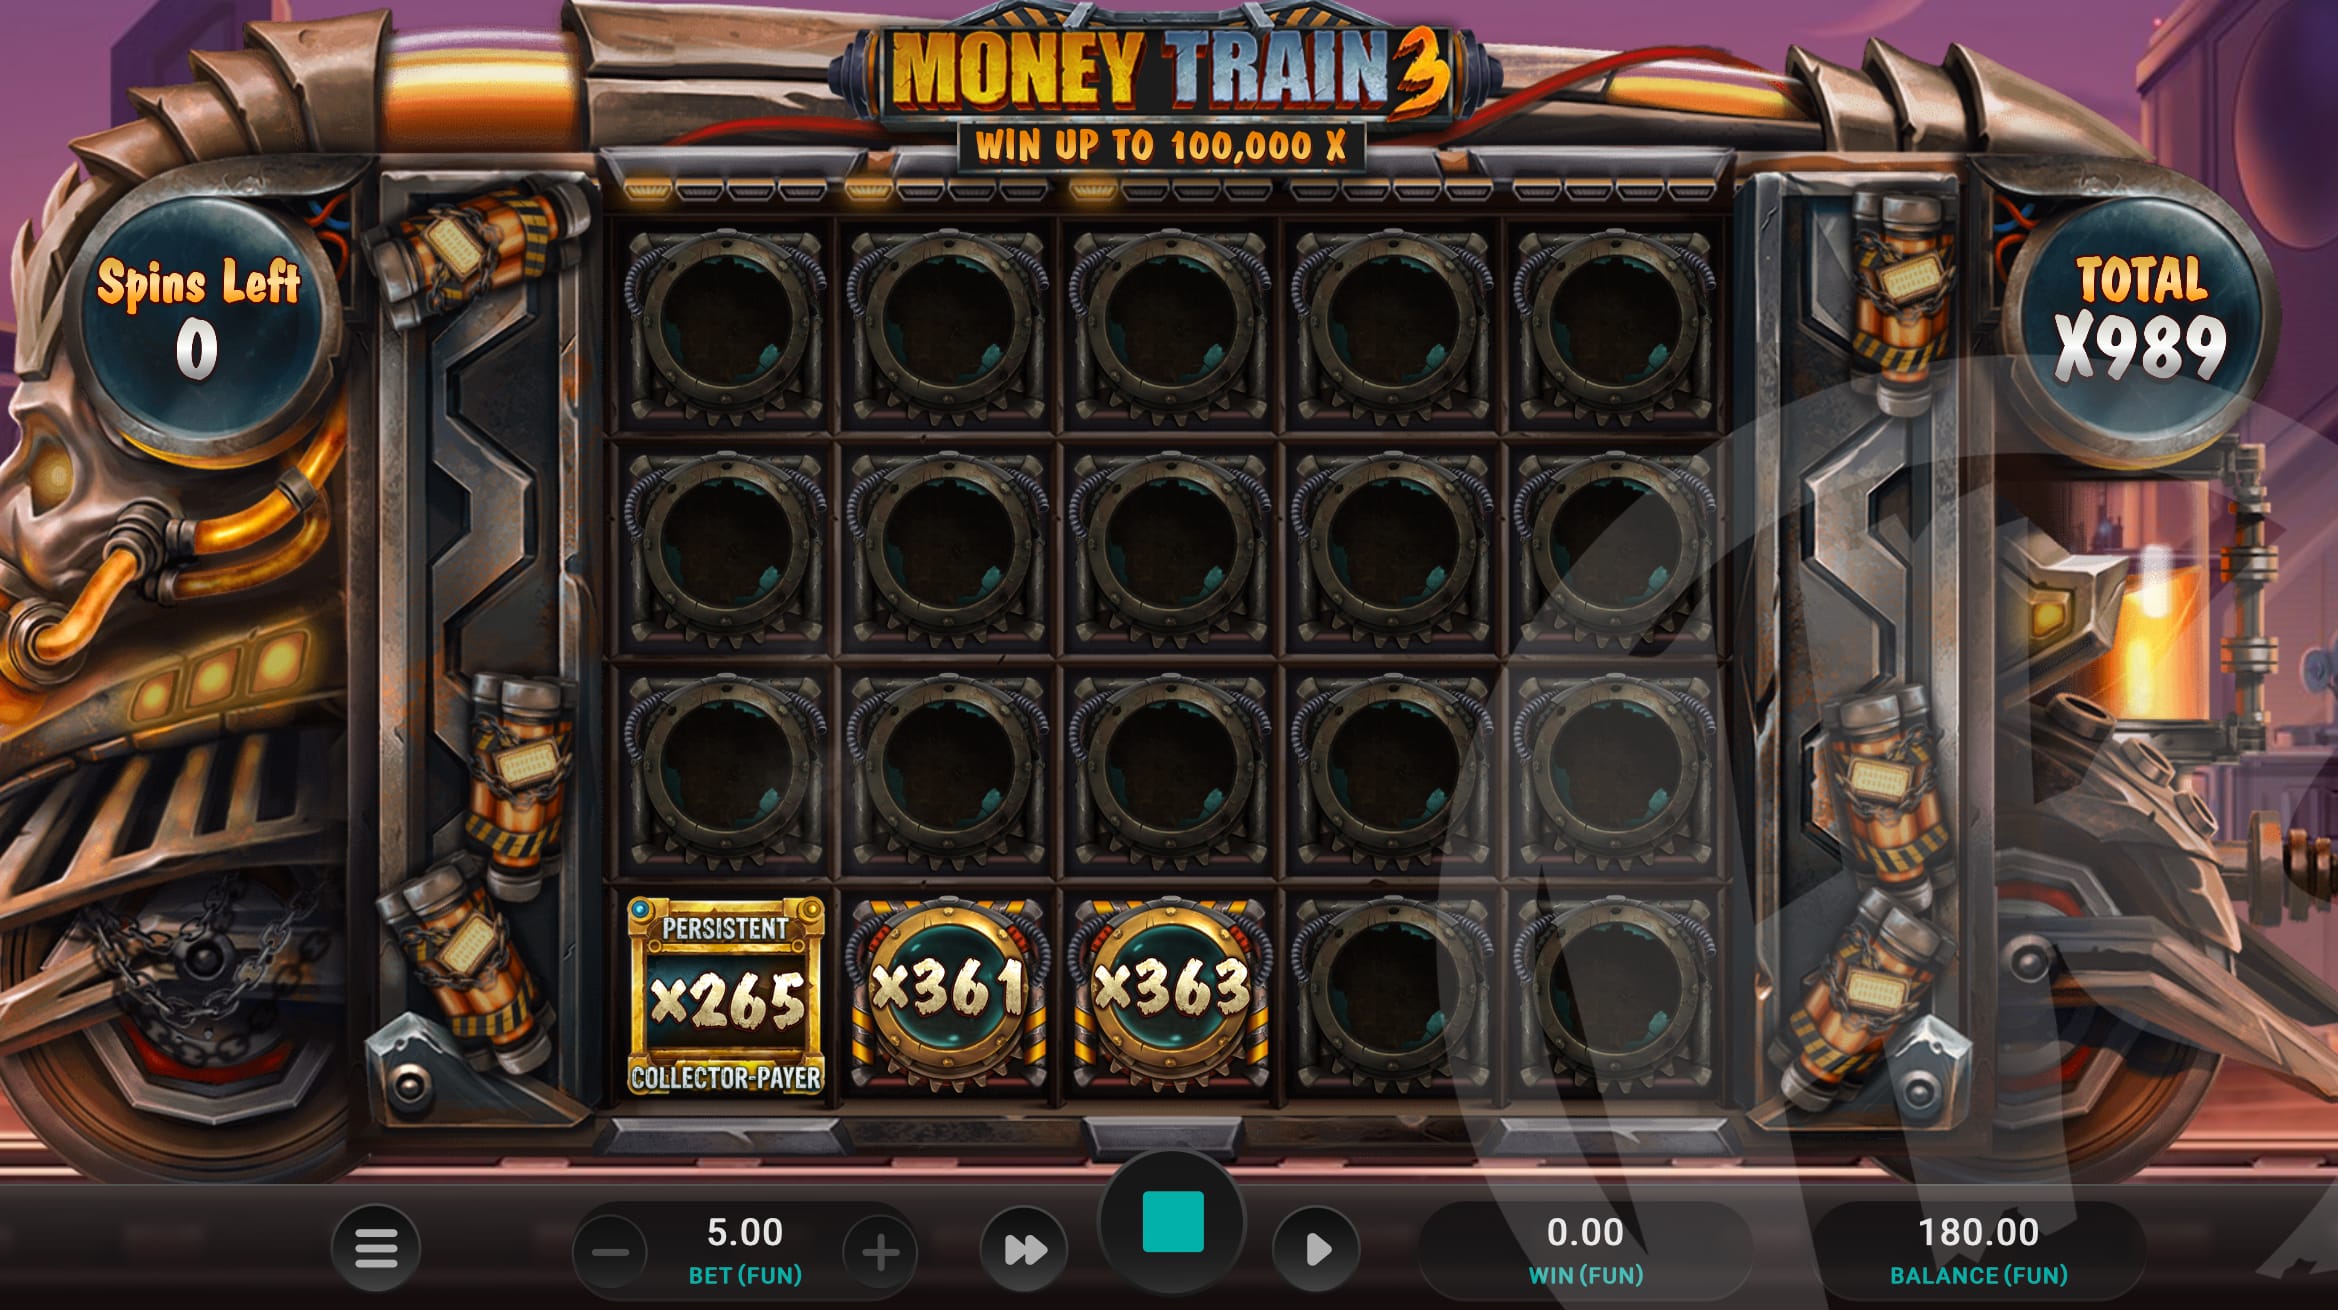 Money Train 3 Persistent Collector-Payer